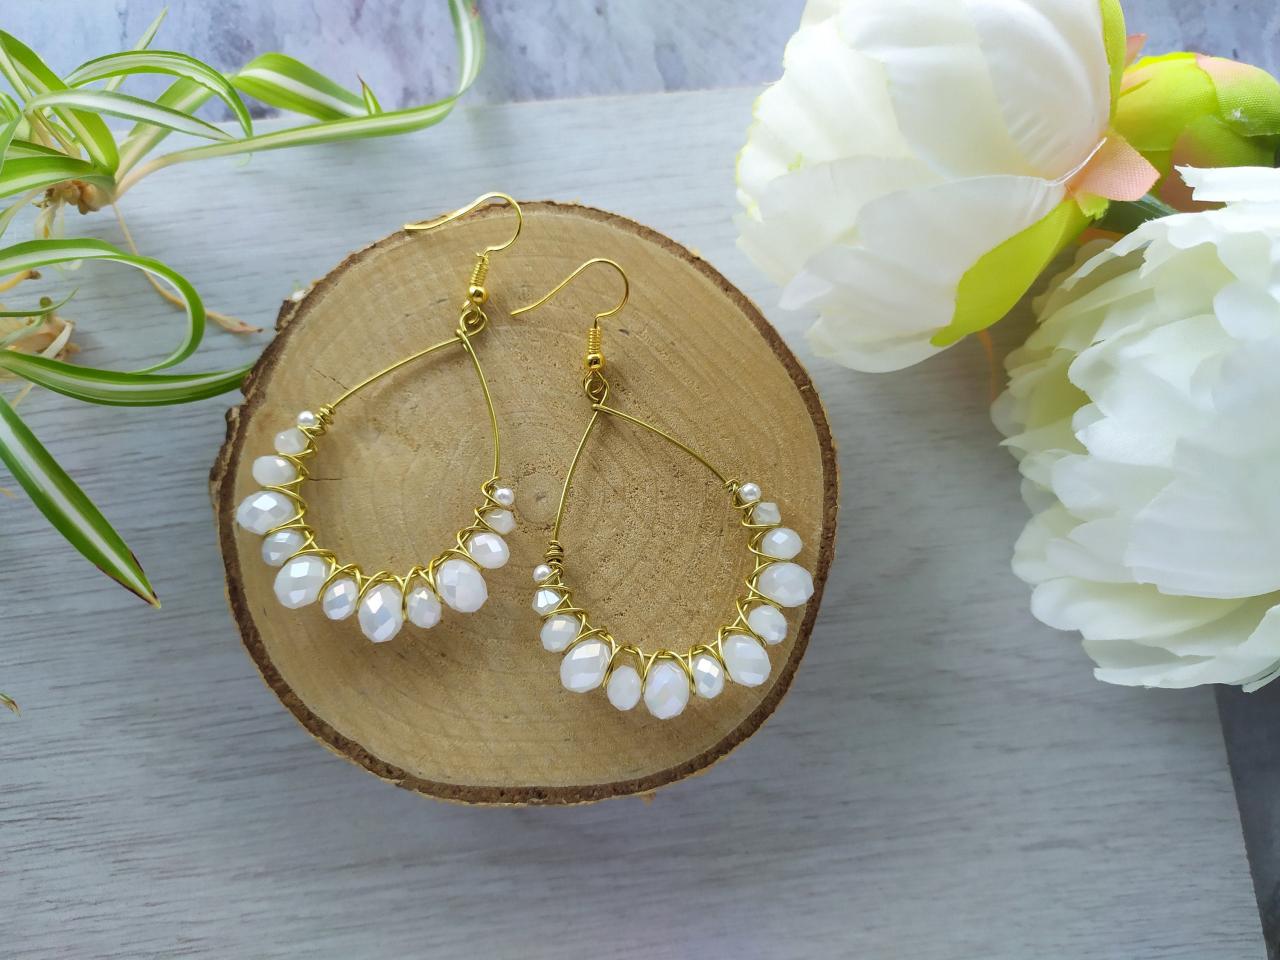 White Wedding Earrings, White And Gold Pearl Earrings For Bride, Bridal Earrings, Boho Bride, Boho Wedding, White Wire Wrapped Earrings